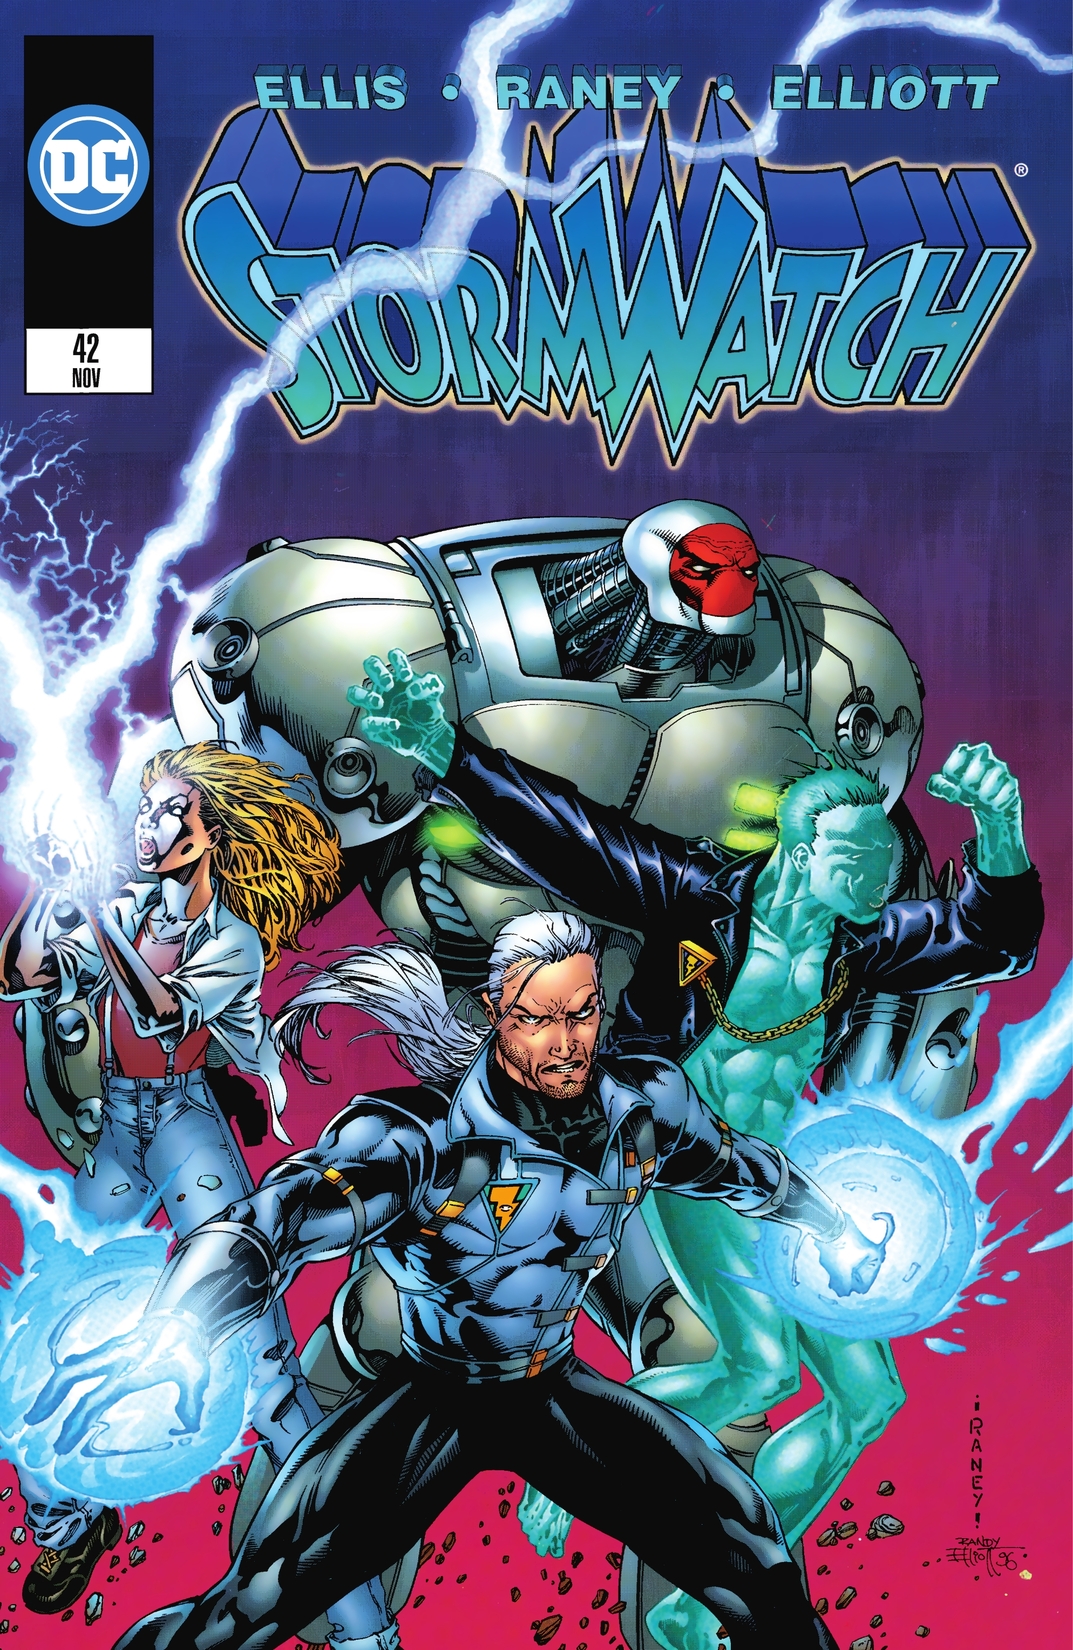 Stormwatch (1993-1997) #42 preview images